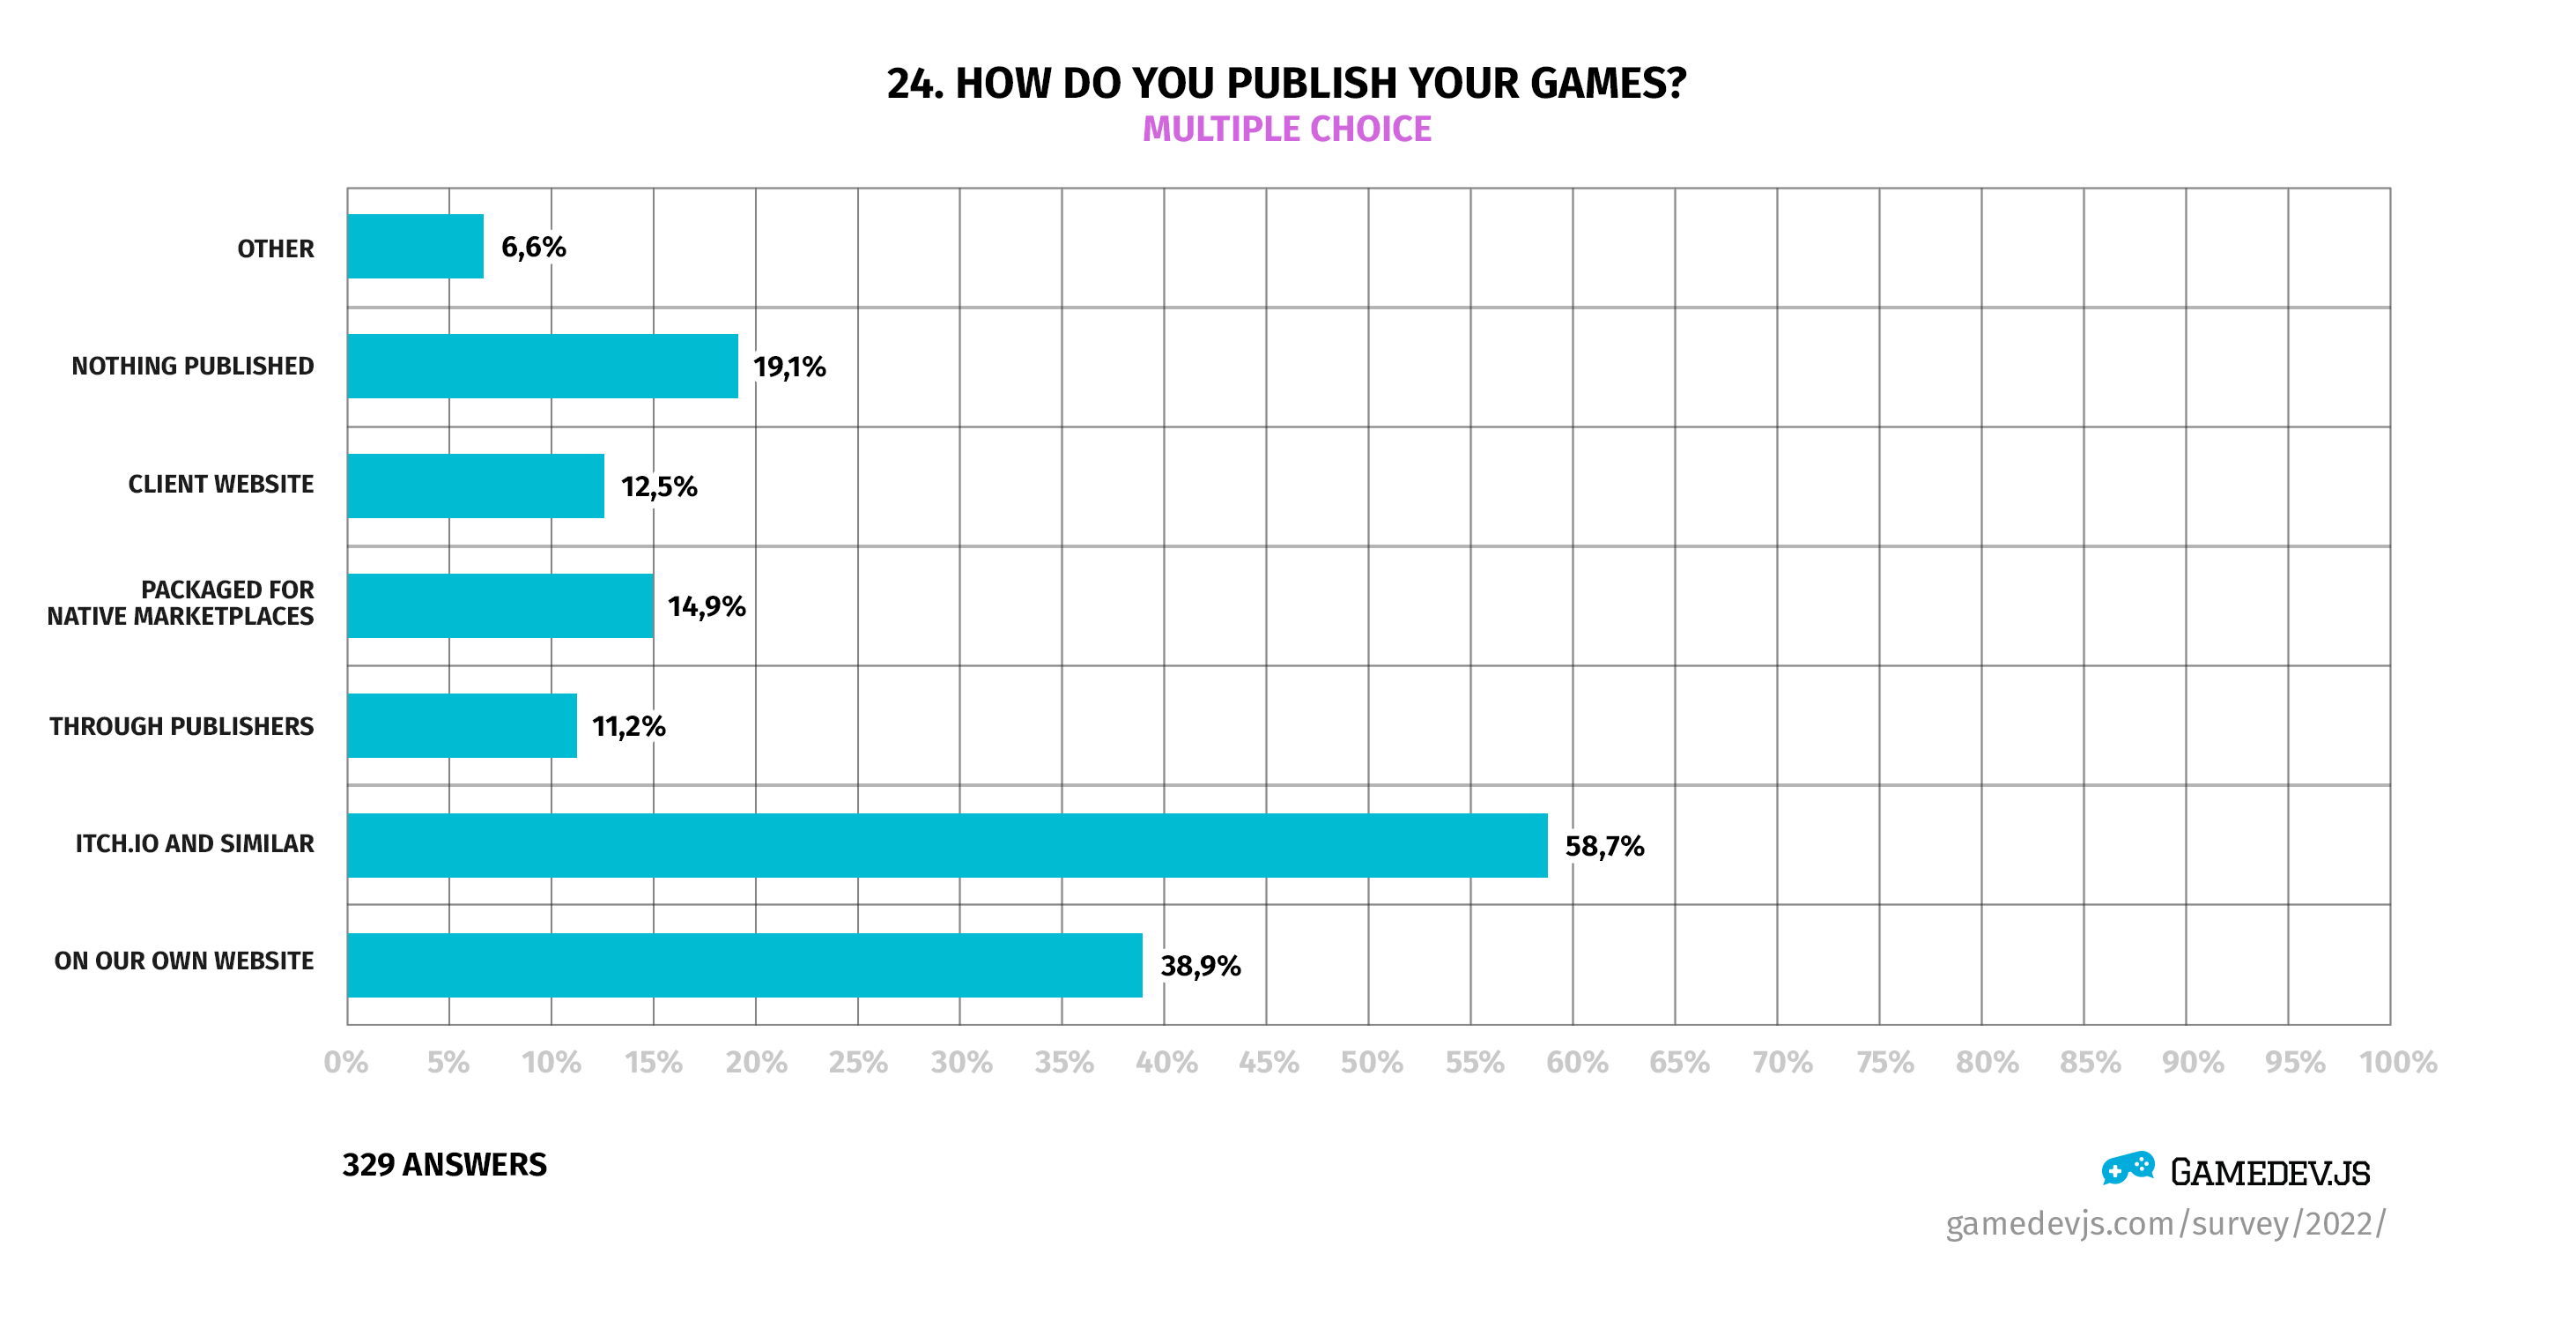 Gamedev.js Survey 2022 - Question #24: How do you publish your games?